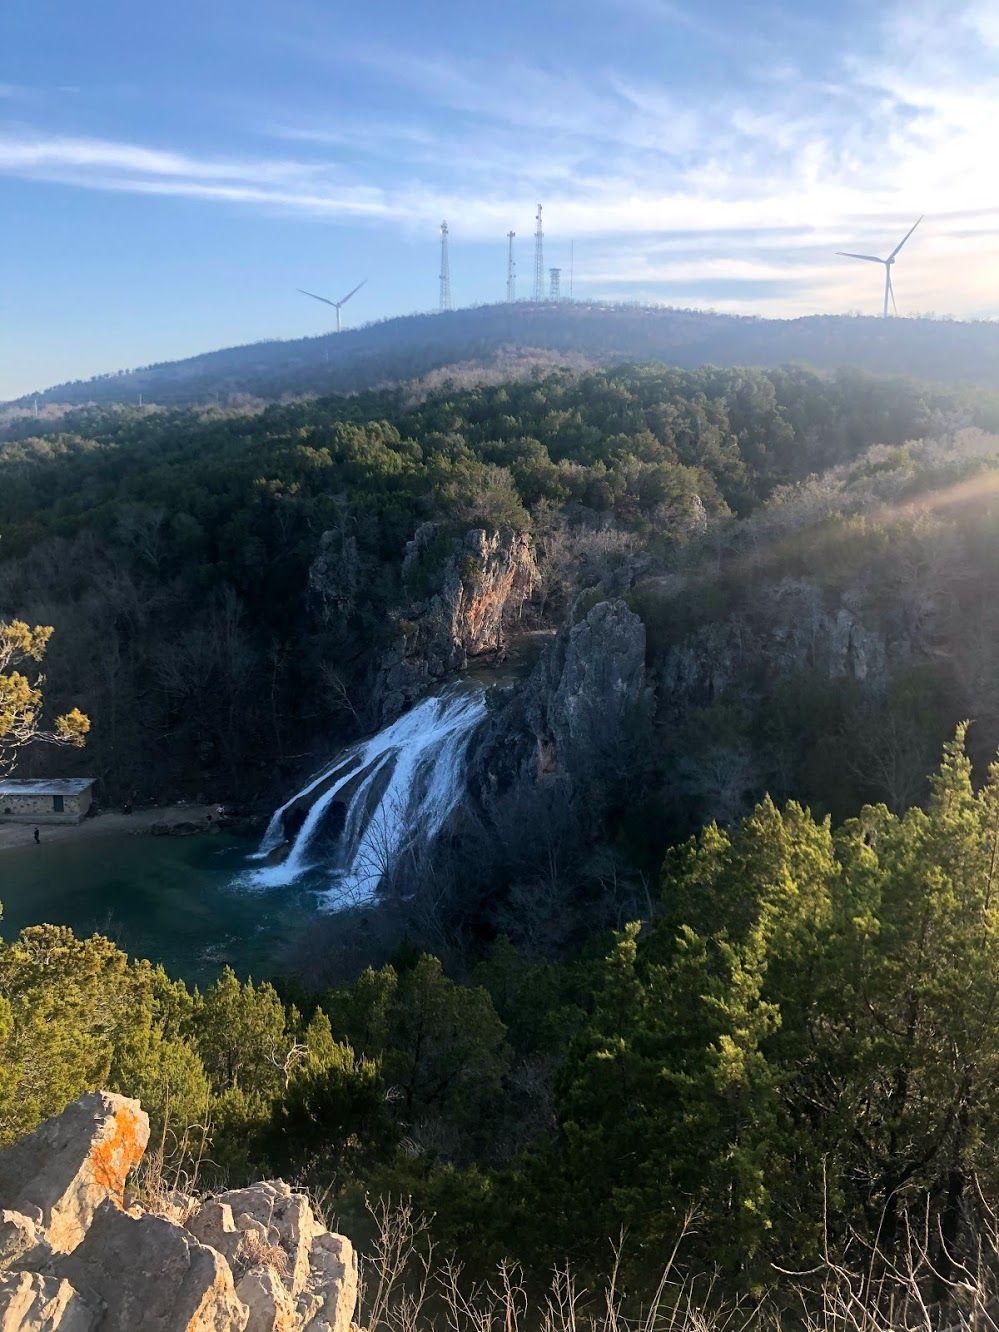 An overlook looking down at Turner Falls.